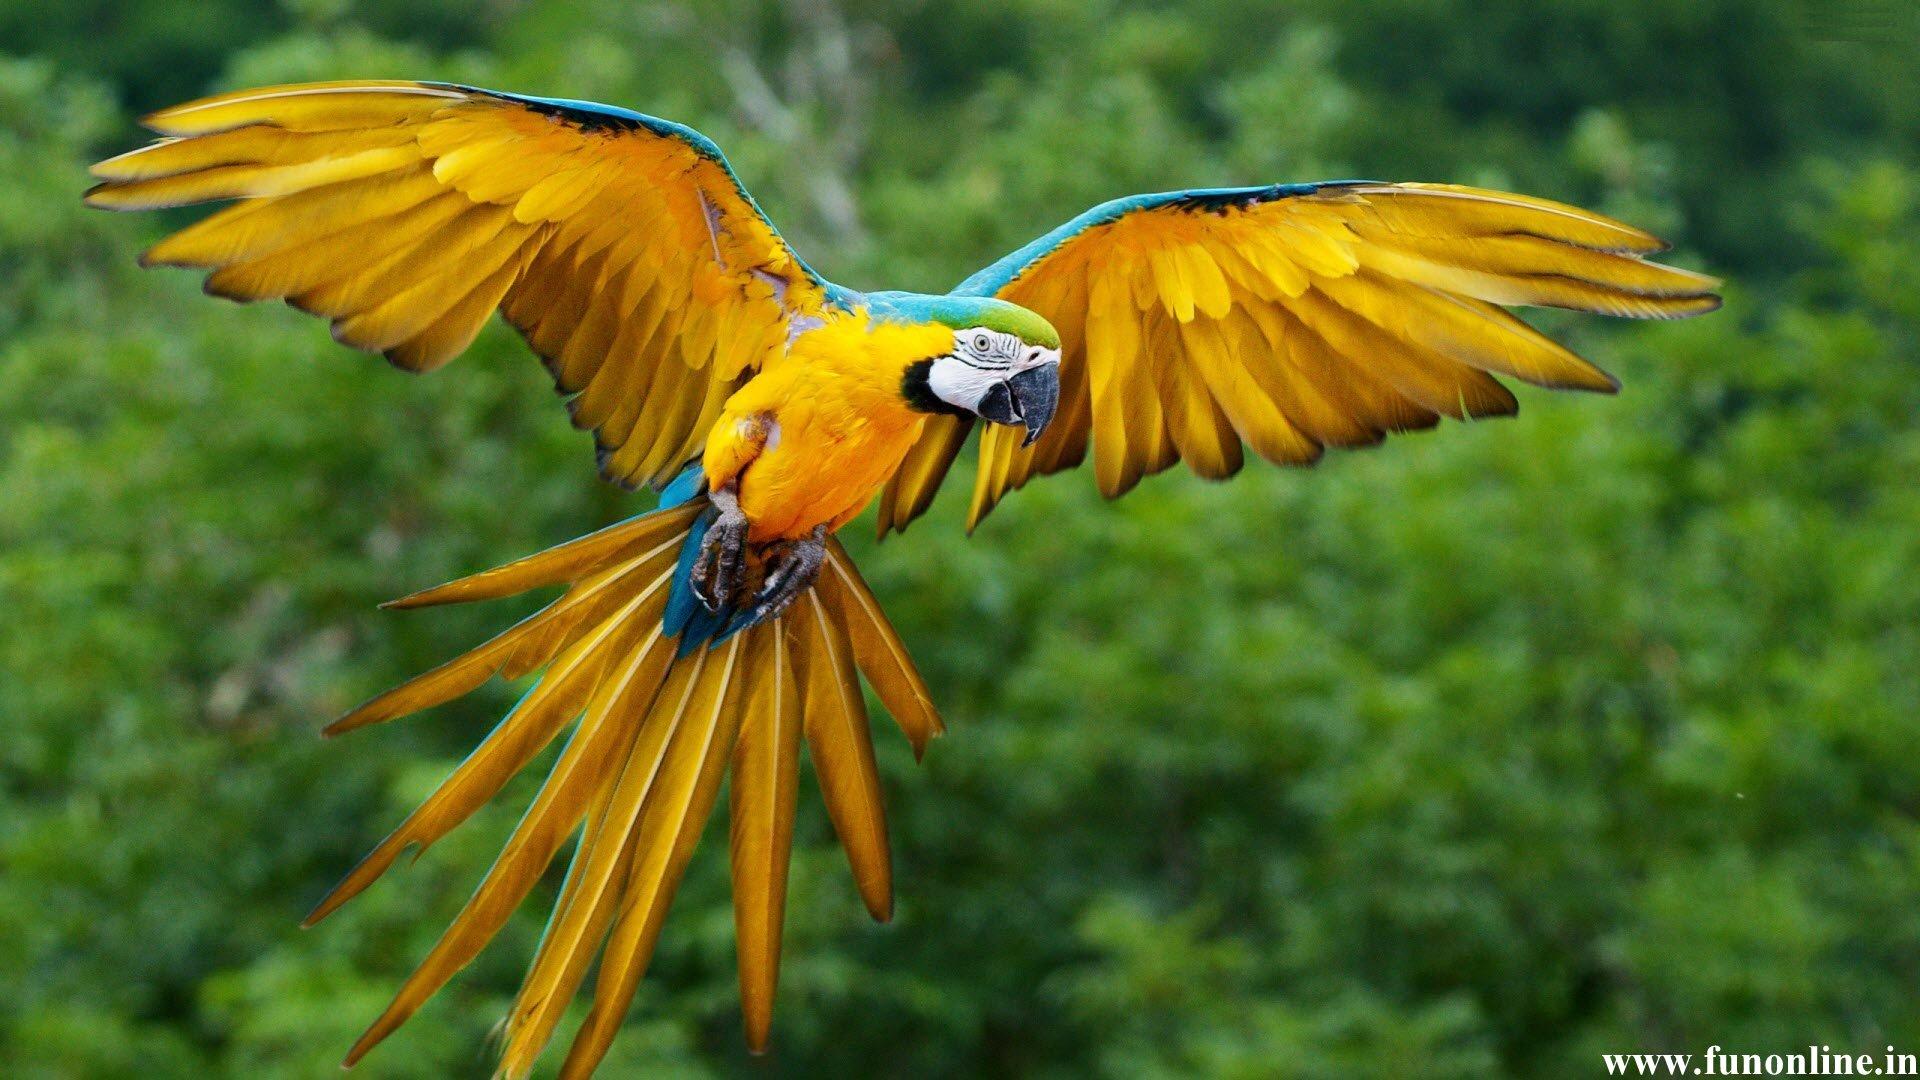 Parrot Wallpapers Download Rich and Striking Parrots HD Wallpaper 1920x1080